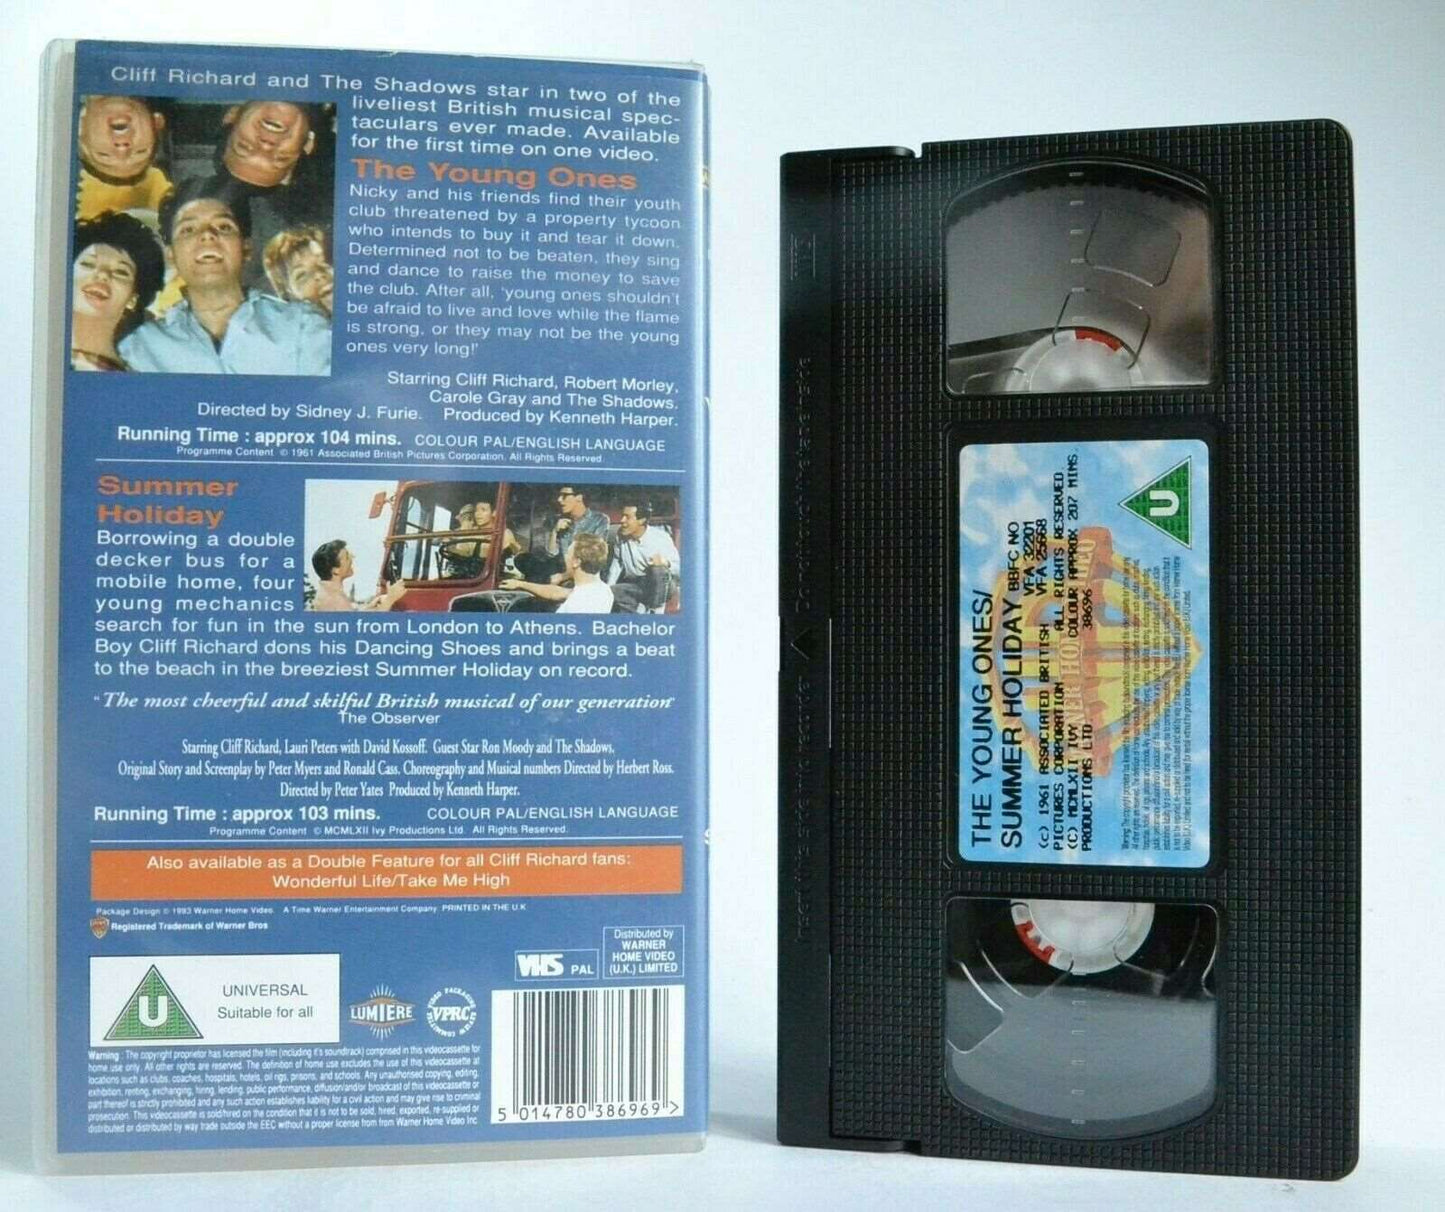 2x Cliff Richards: The Young Ones/Summer Holiday - British Musicals - Pal VHS-